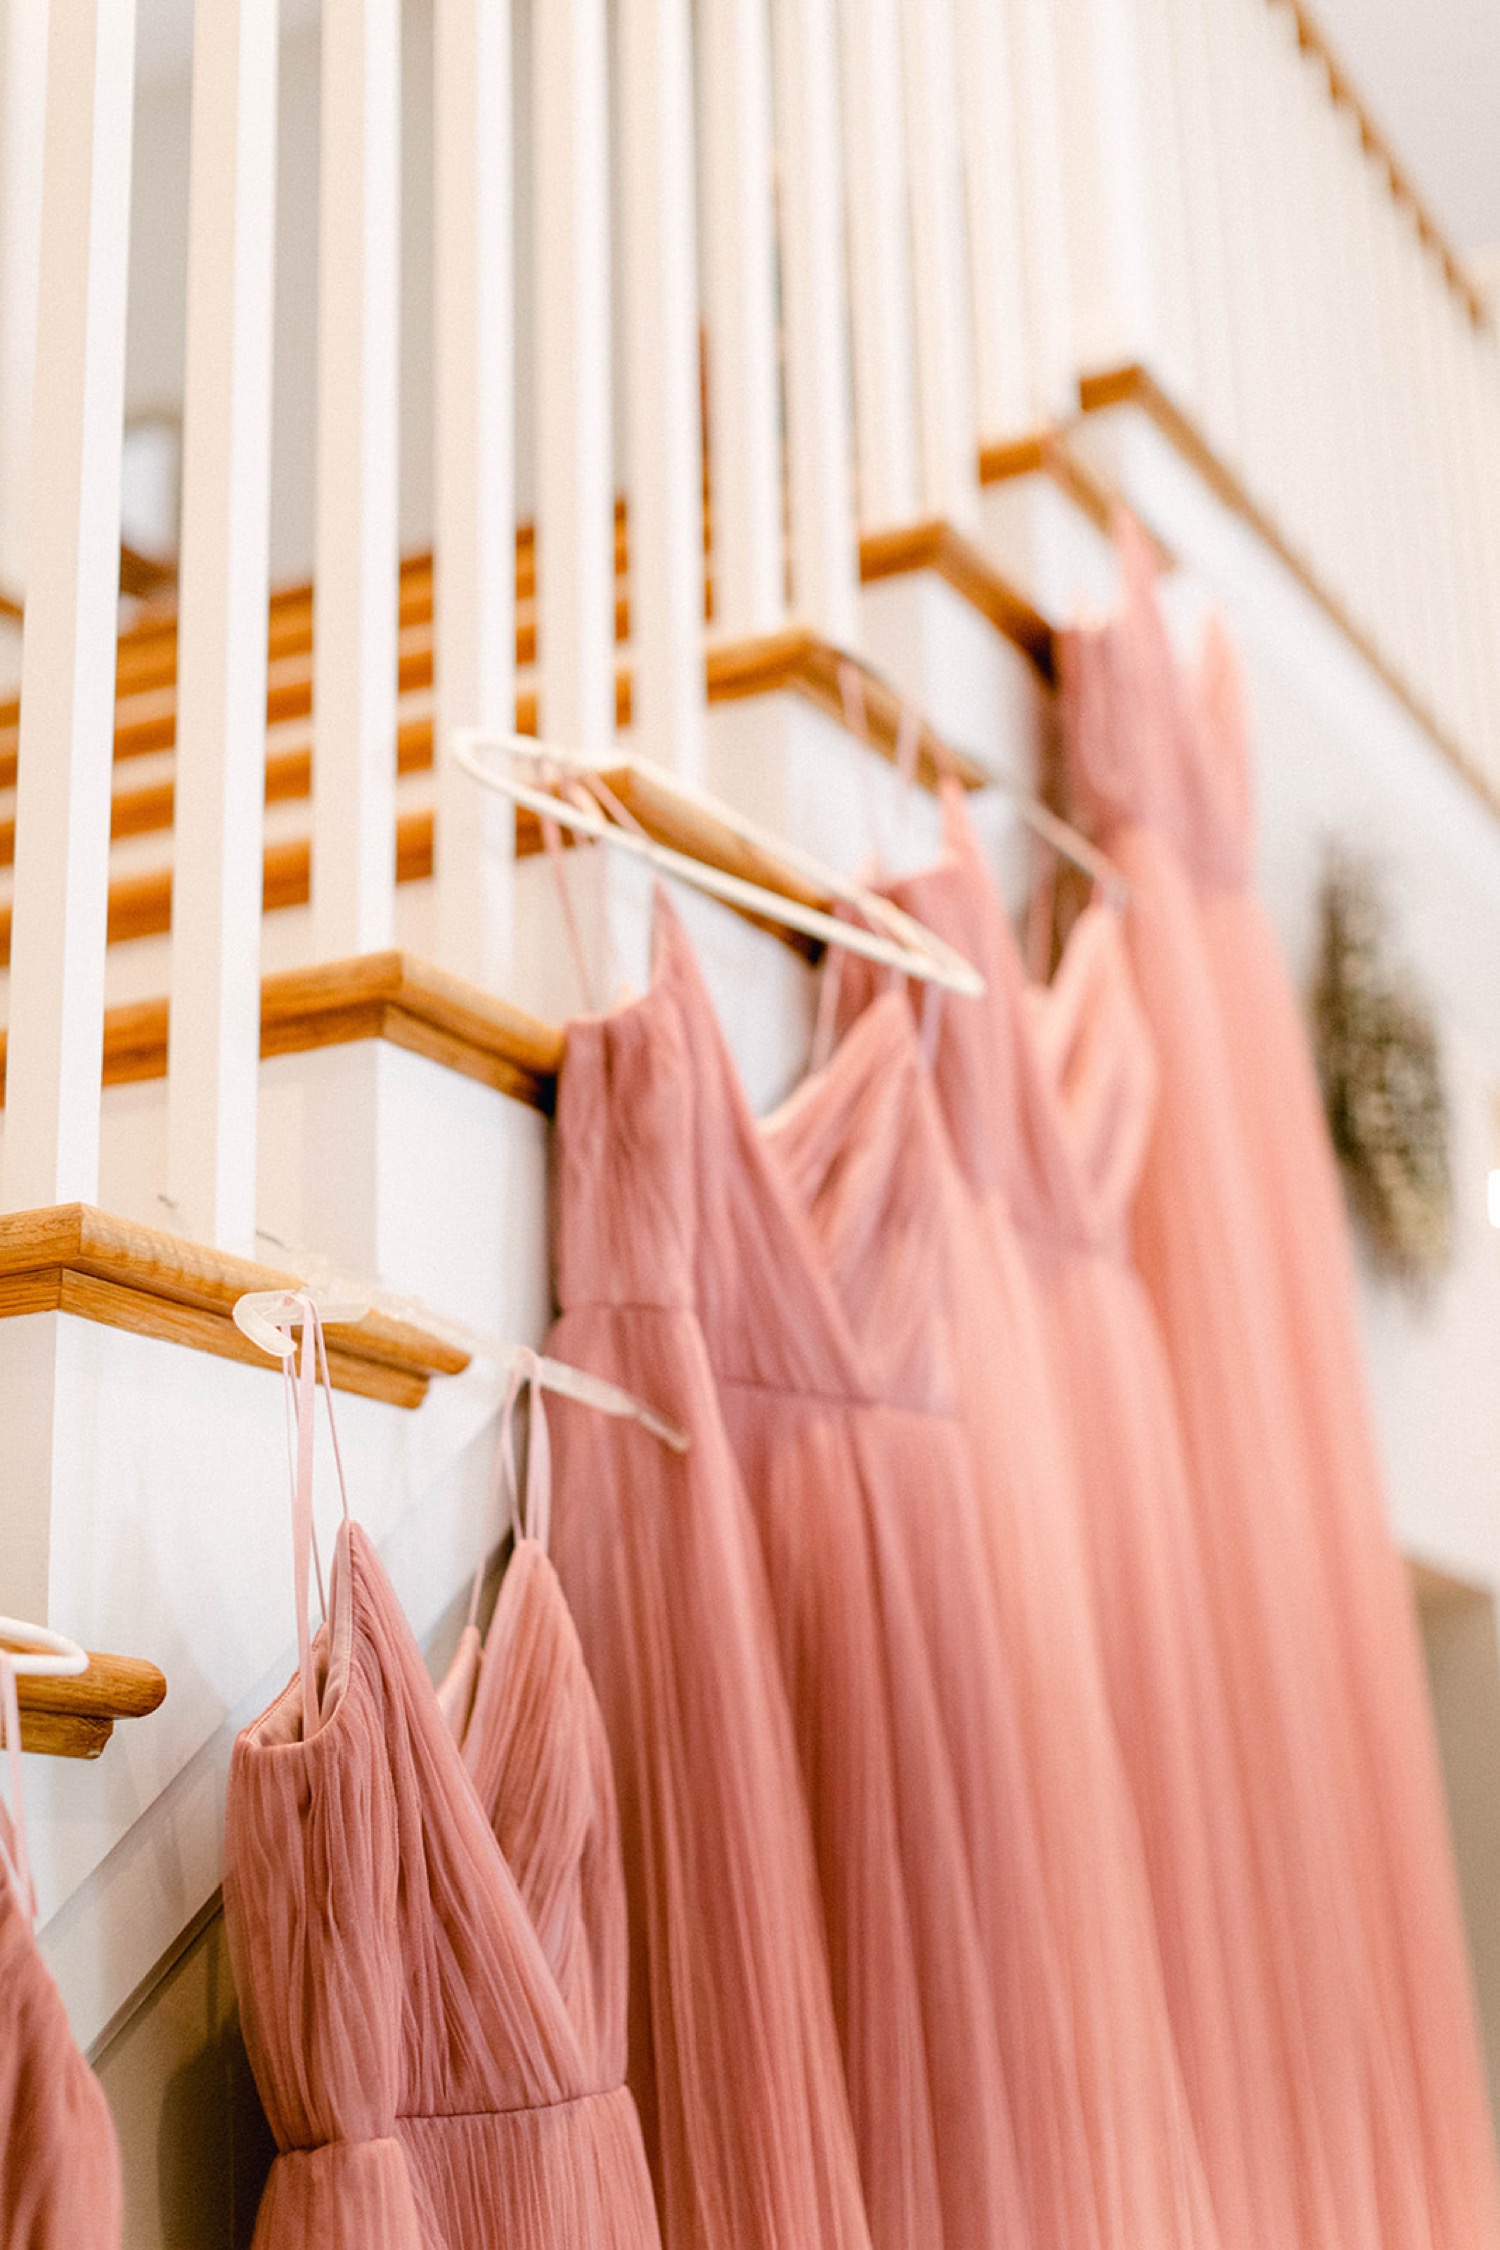 pink bridesmaids dresses hanging on staircase railing